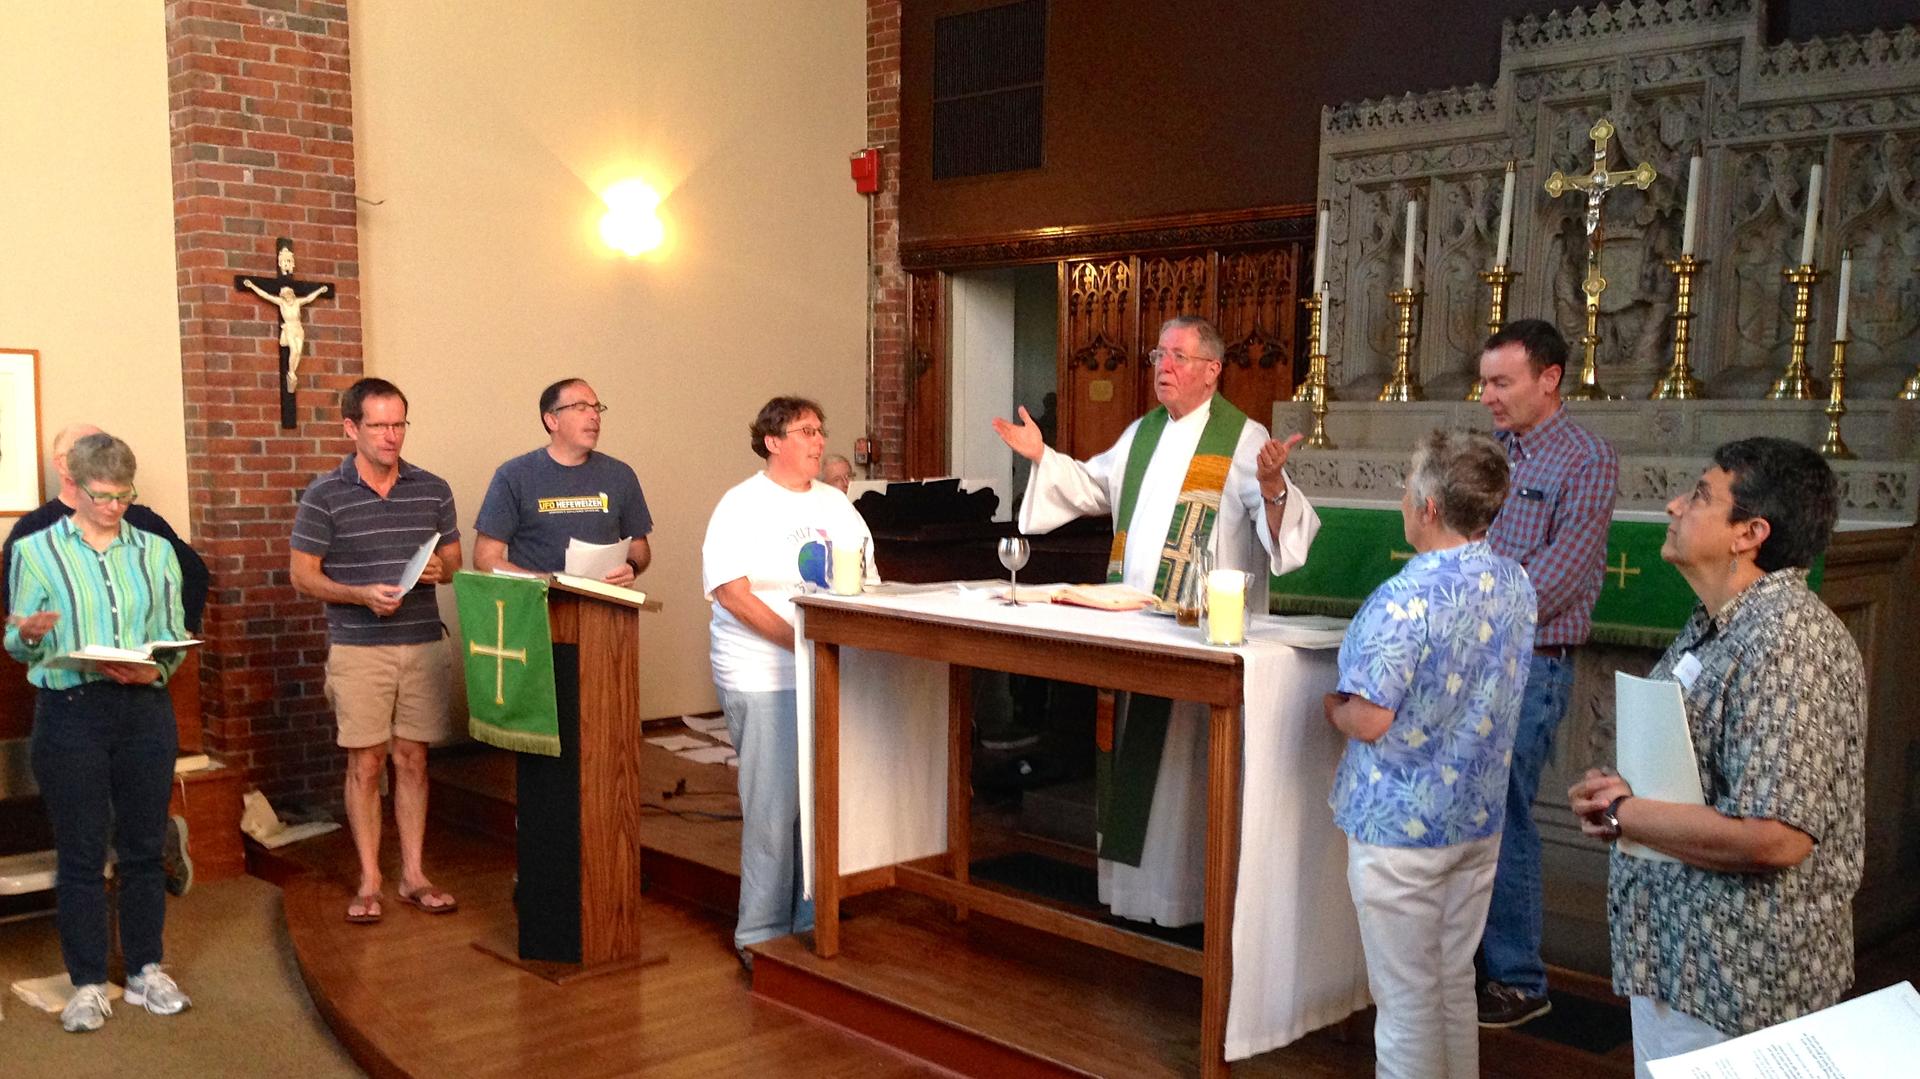 Members of Dignity Boston, a congregation of LGBT Catholics and their supporters, attend Sunday liturgy service on August 9, 2015.